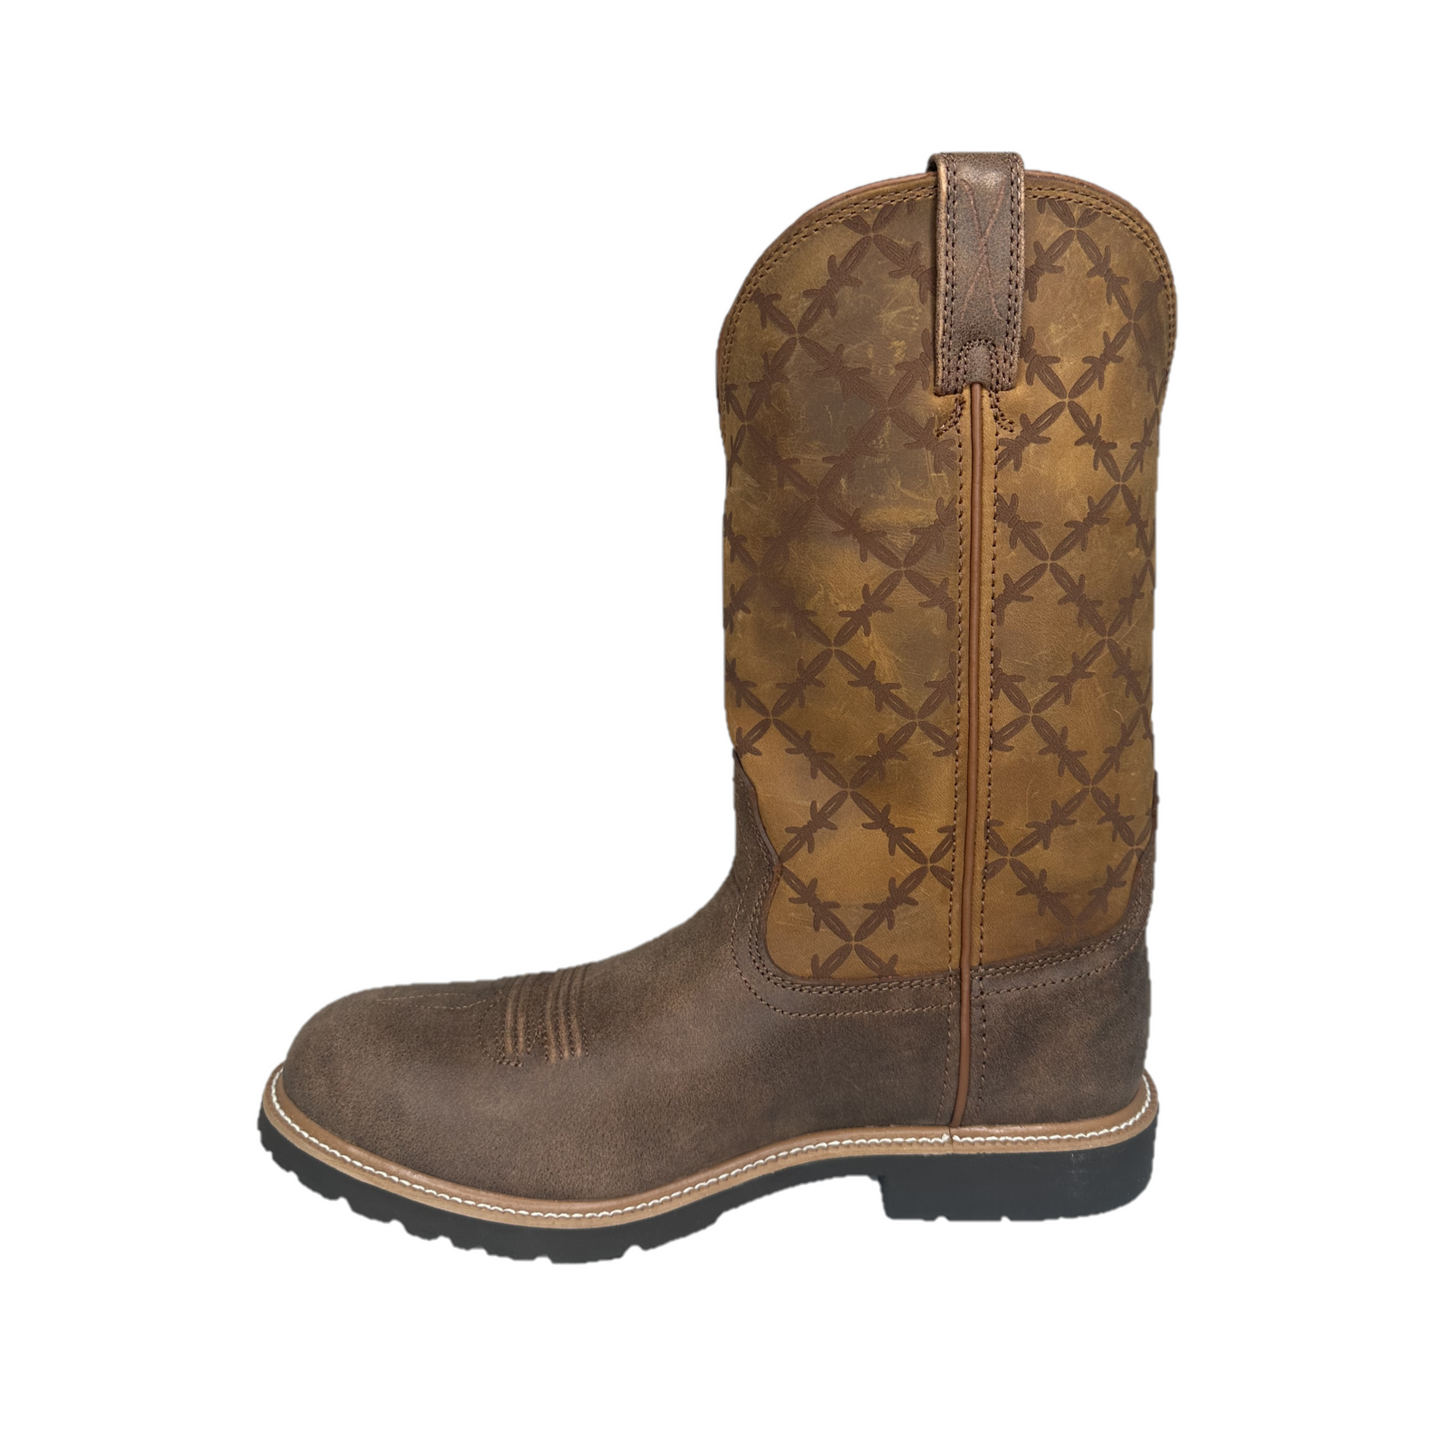 Twisted X Men's Brown & Squash Barbwire Embroidery Western Boots MXTR015